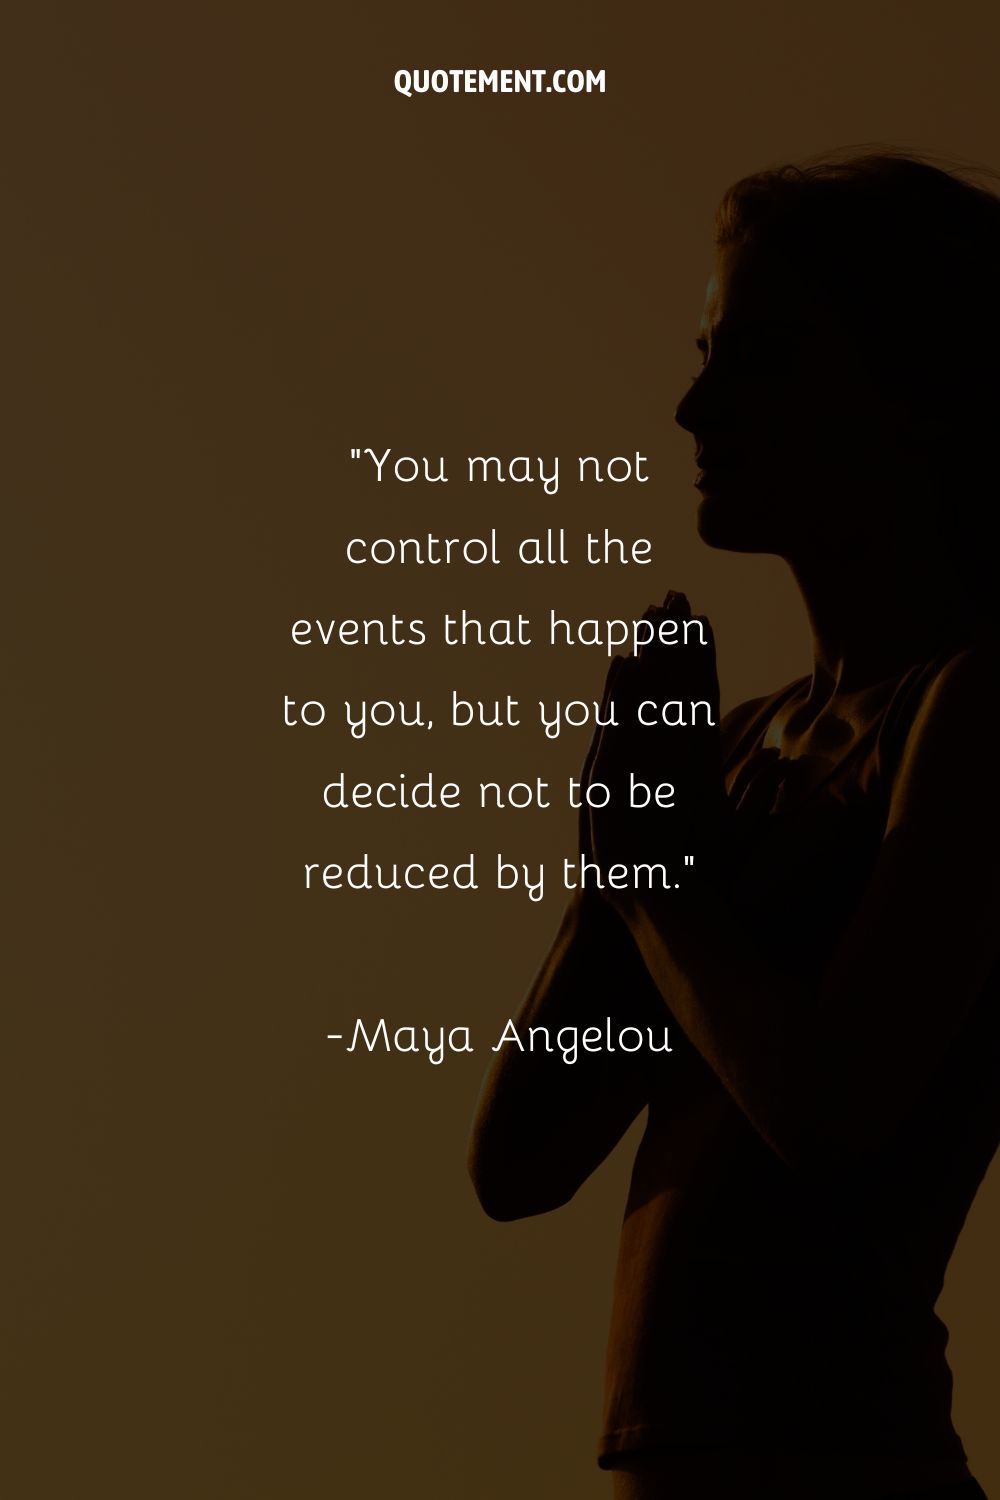 Image of a woman in meditation representing a quote by Maya Angelou.